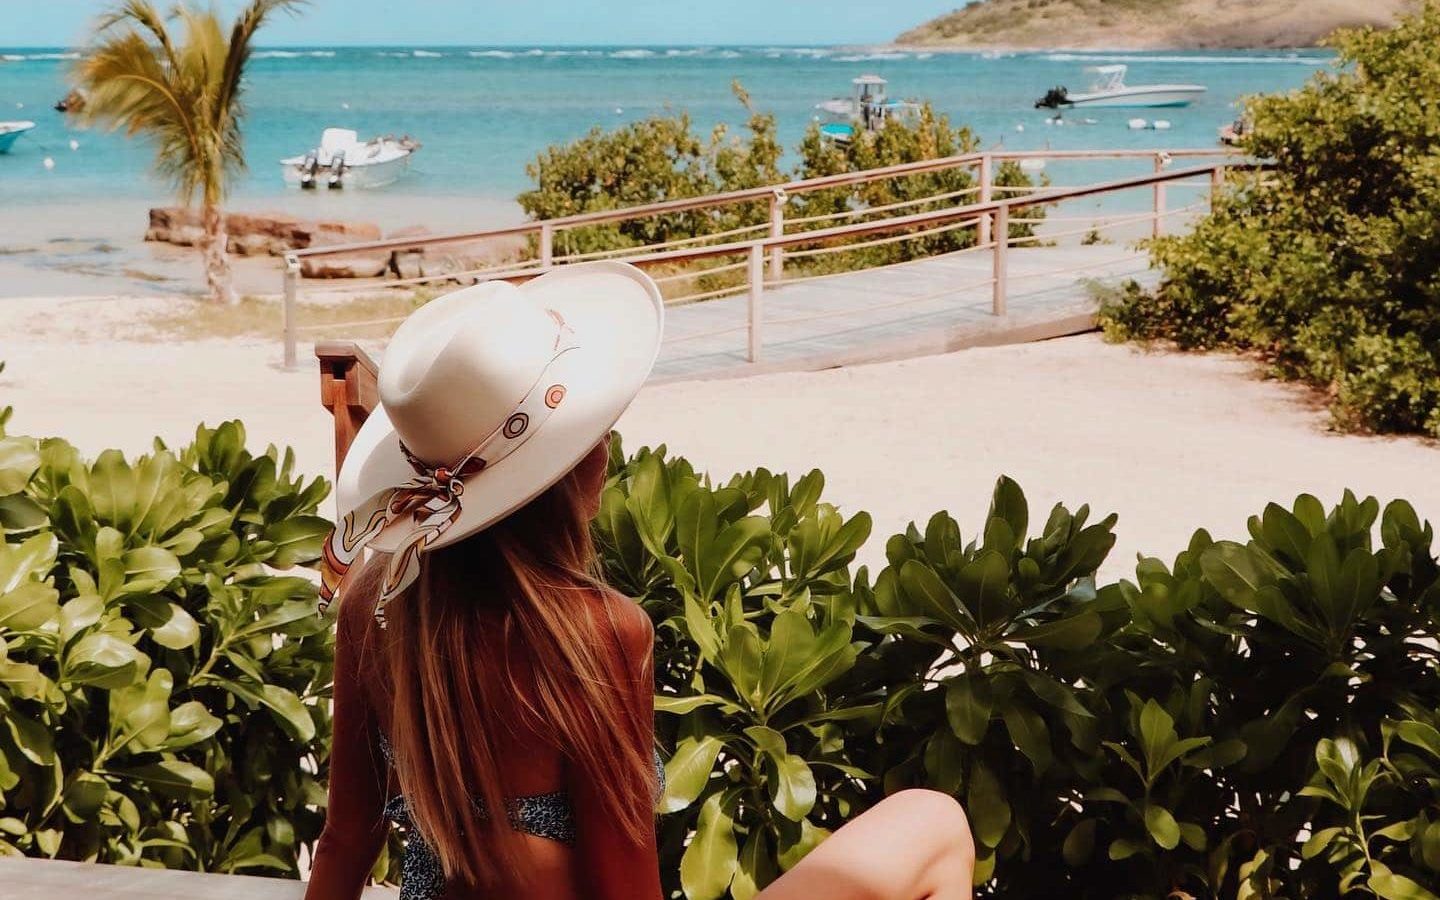 Woman in bikini and white straw wide-brimmed hat sitting on edge of lounge chair with back to camera looking out at white sandy beach, palm trees, and turquoise ocean.